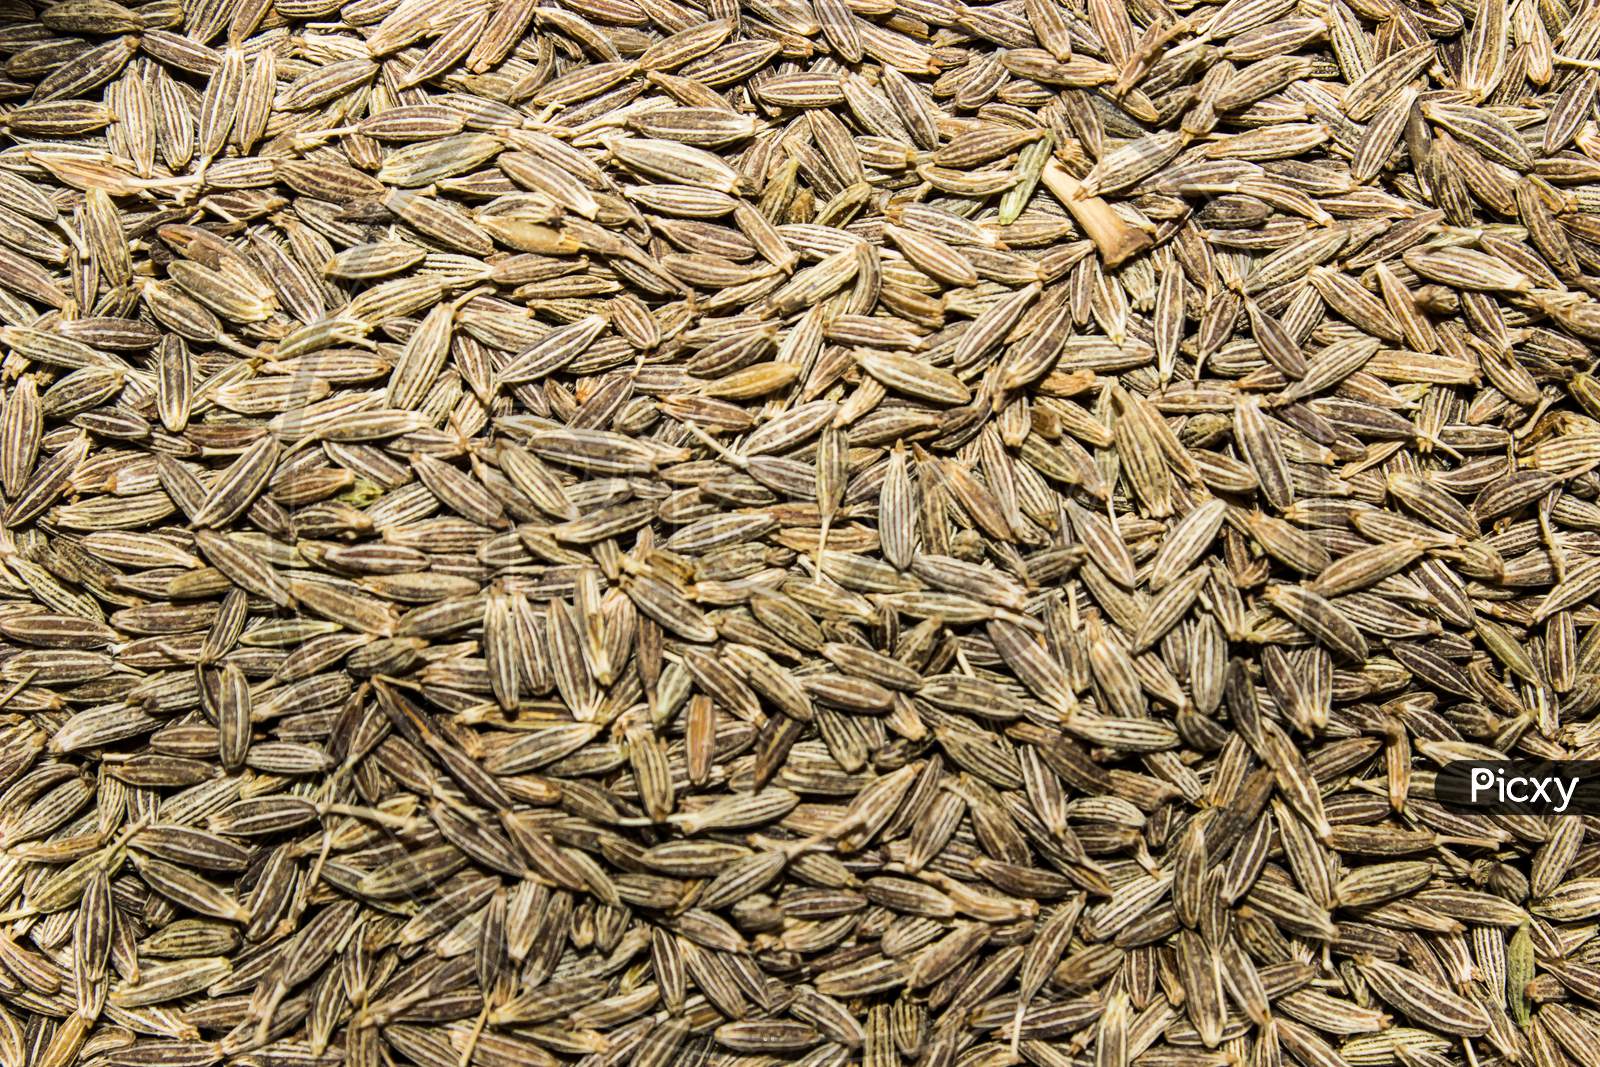 A picture of cumin seeds